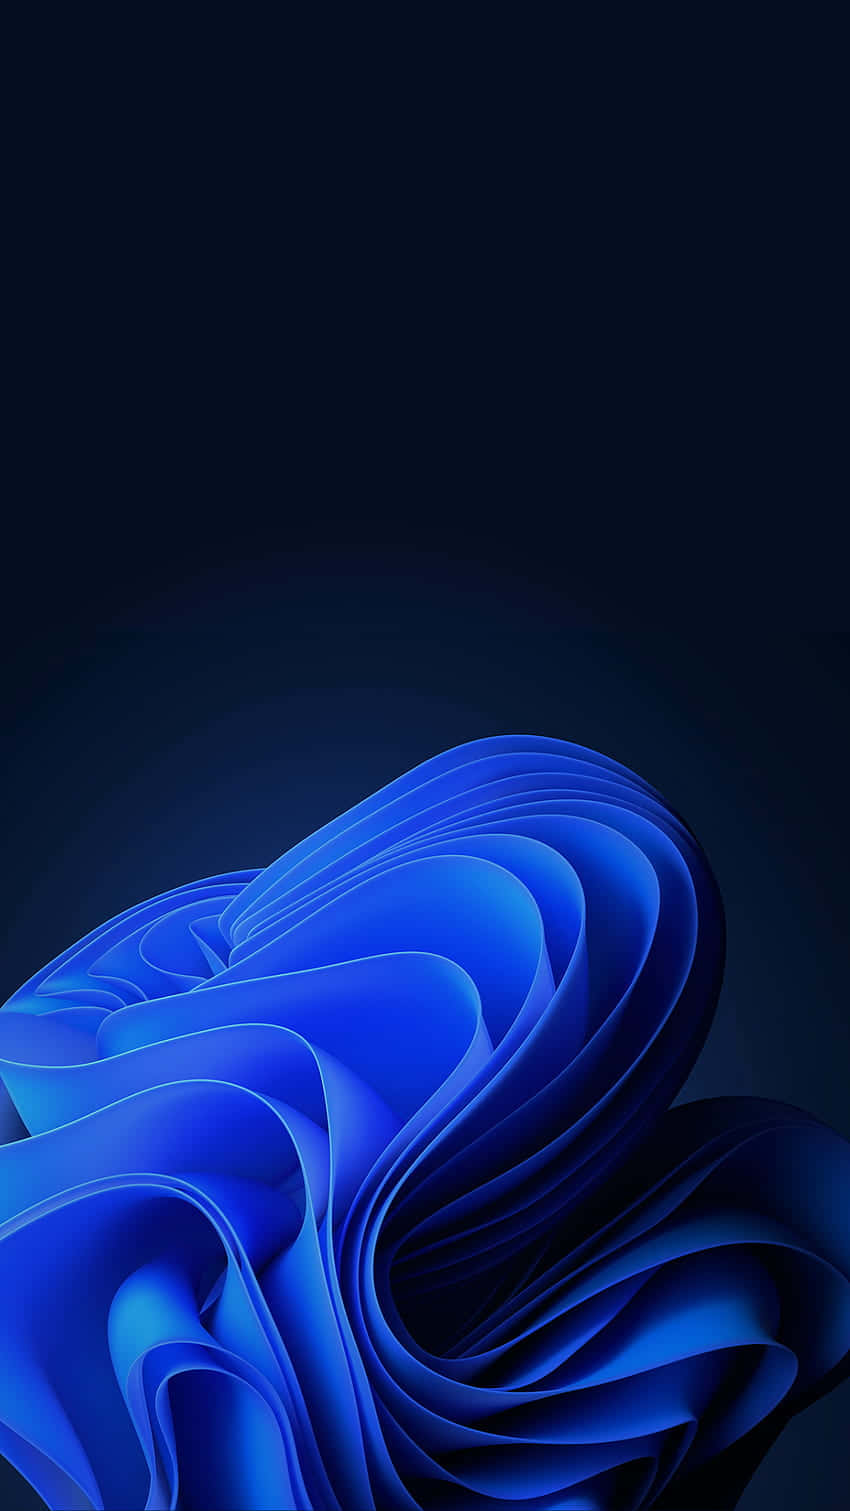 Electric Blue Abstract Wave Art Wallpaper